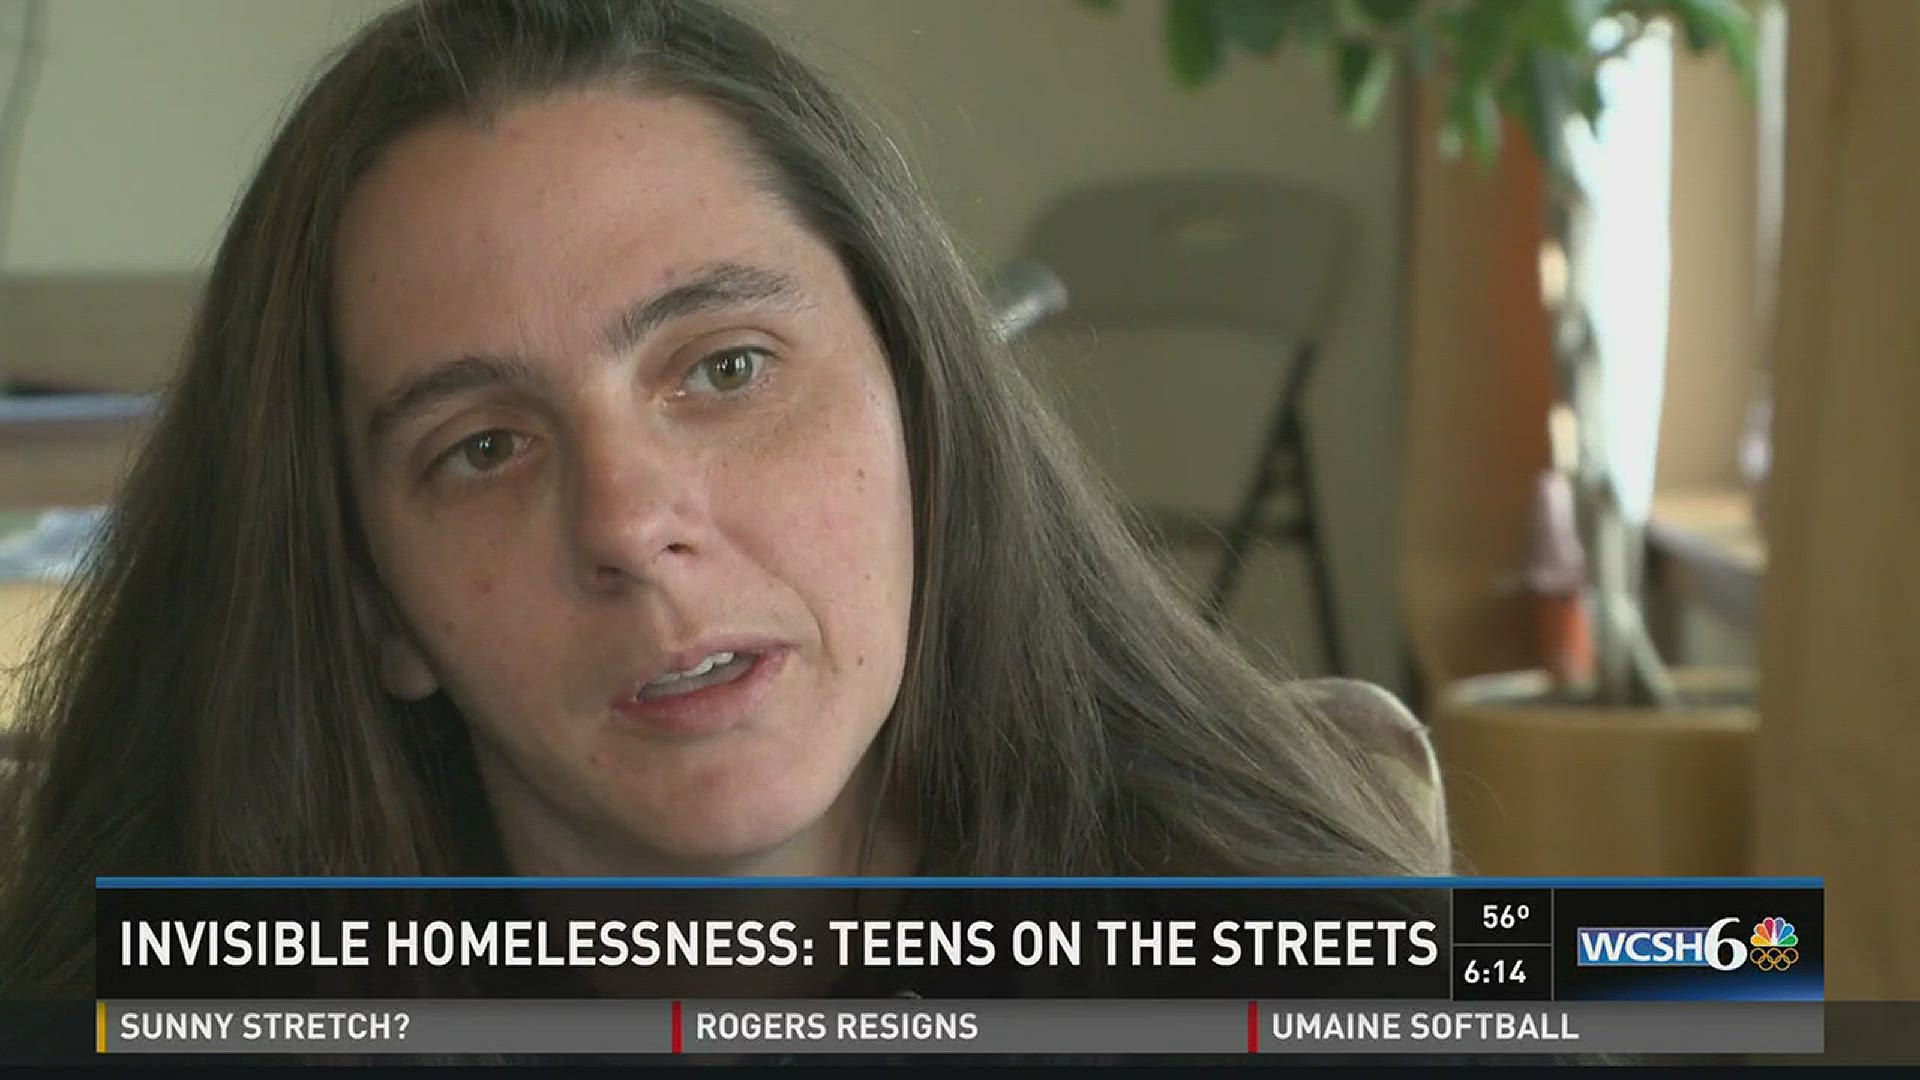 Invisible homelessness: teens on the streets